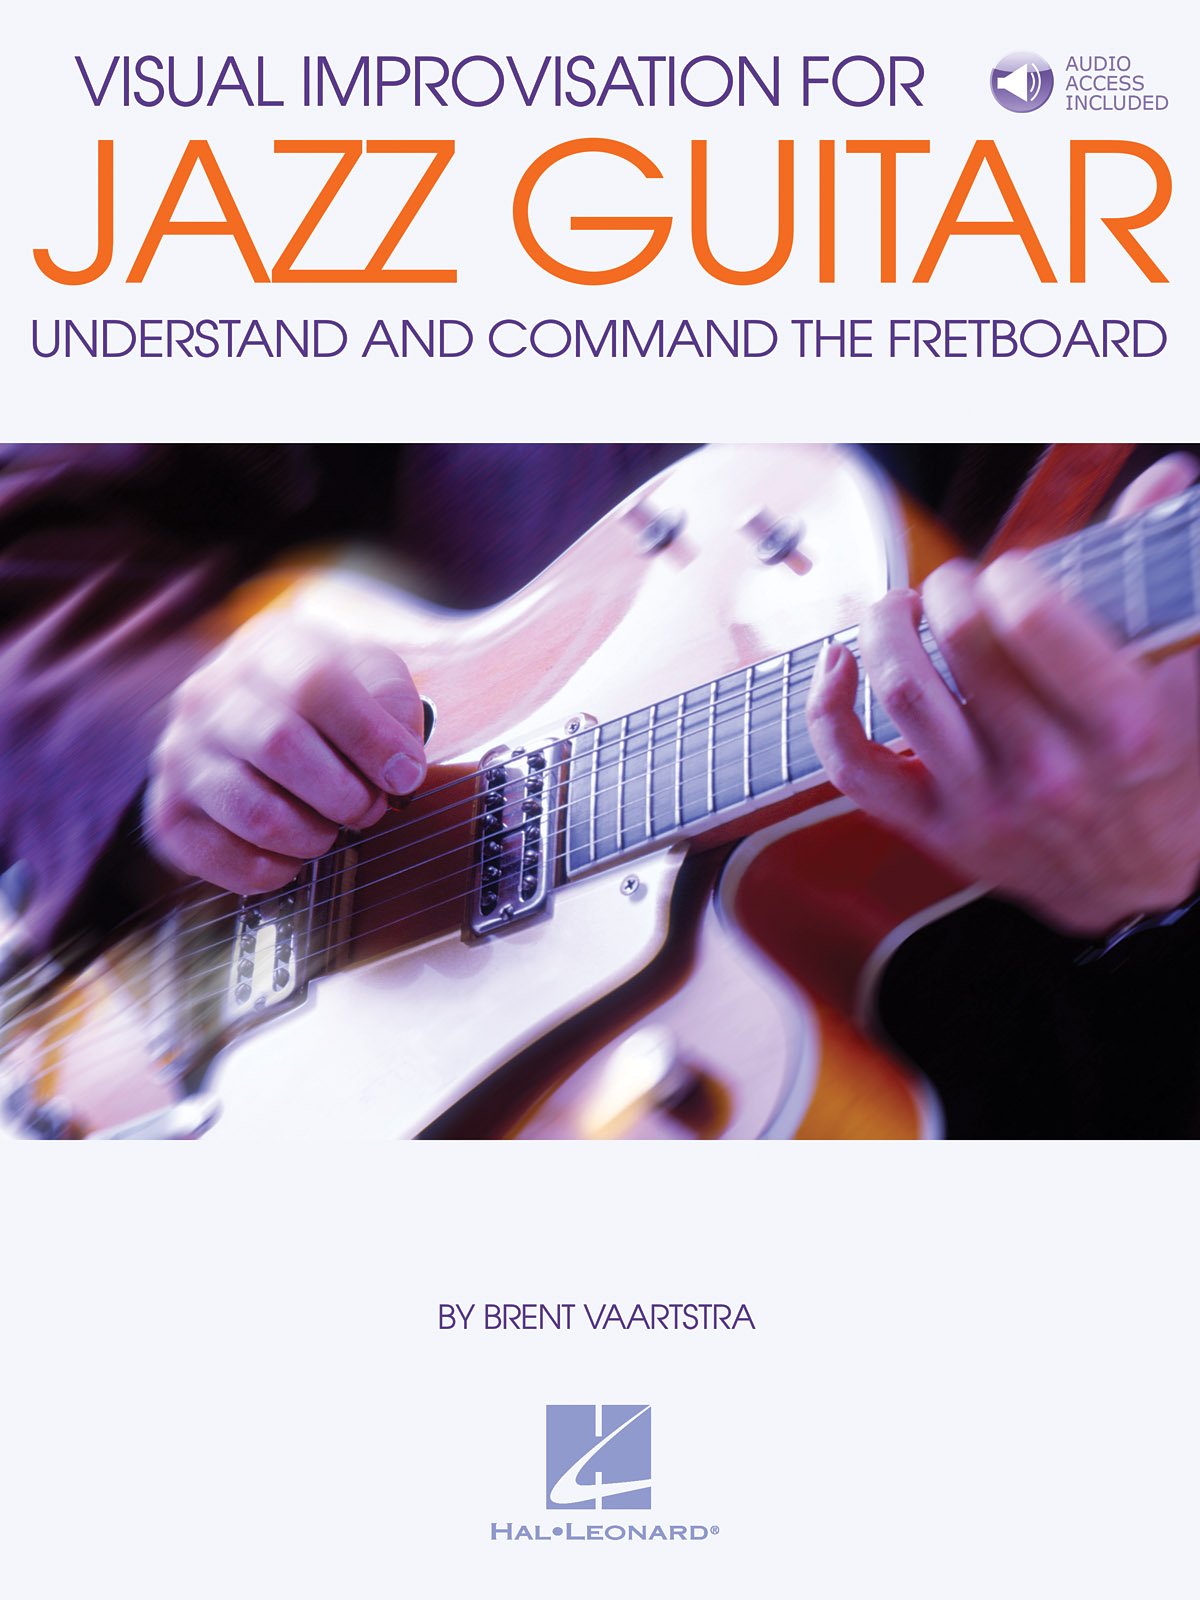 Visual Improvisation for Jazz Guitar - Understand and Command the Fretboard